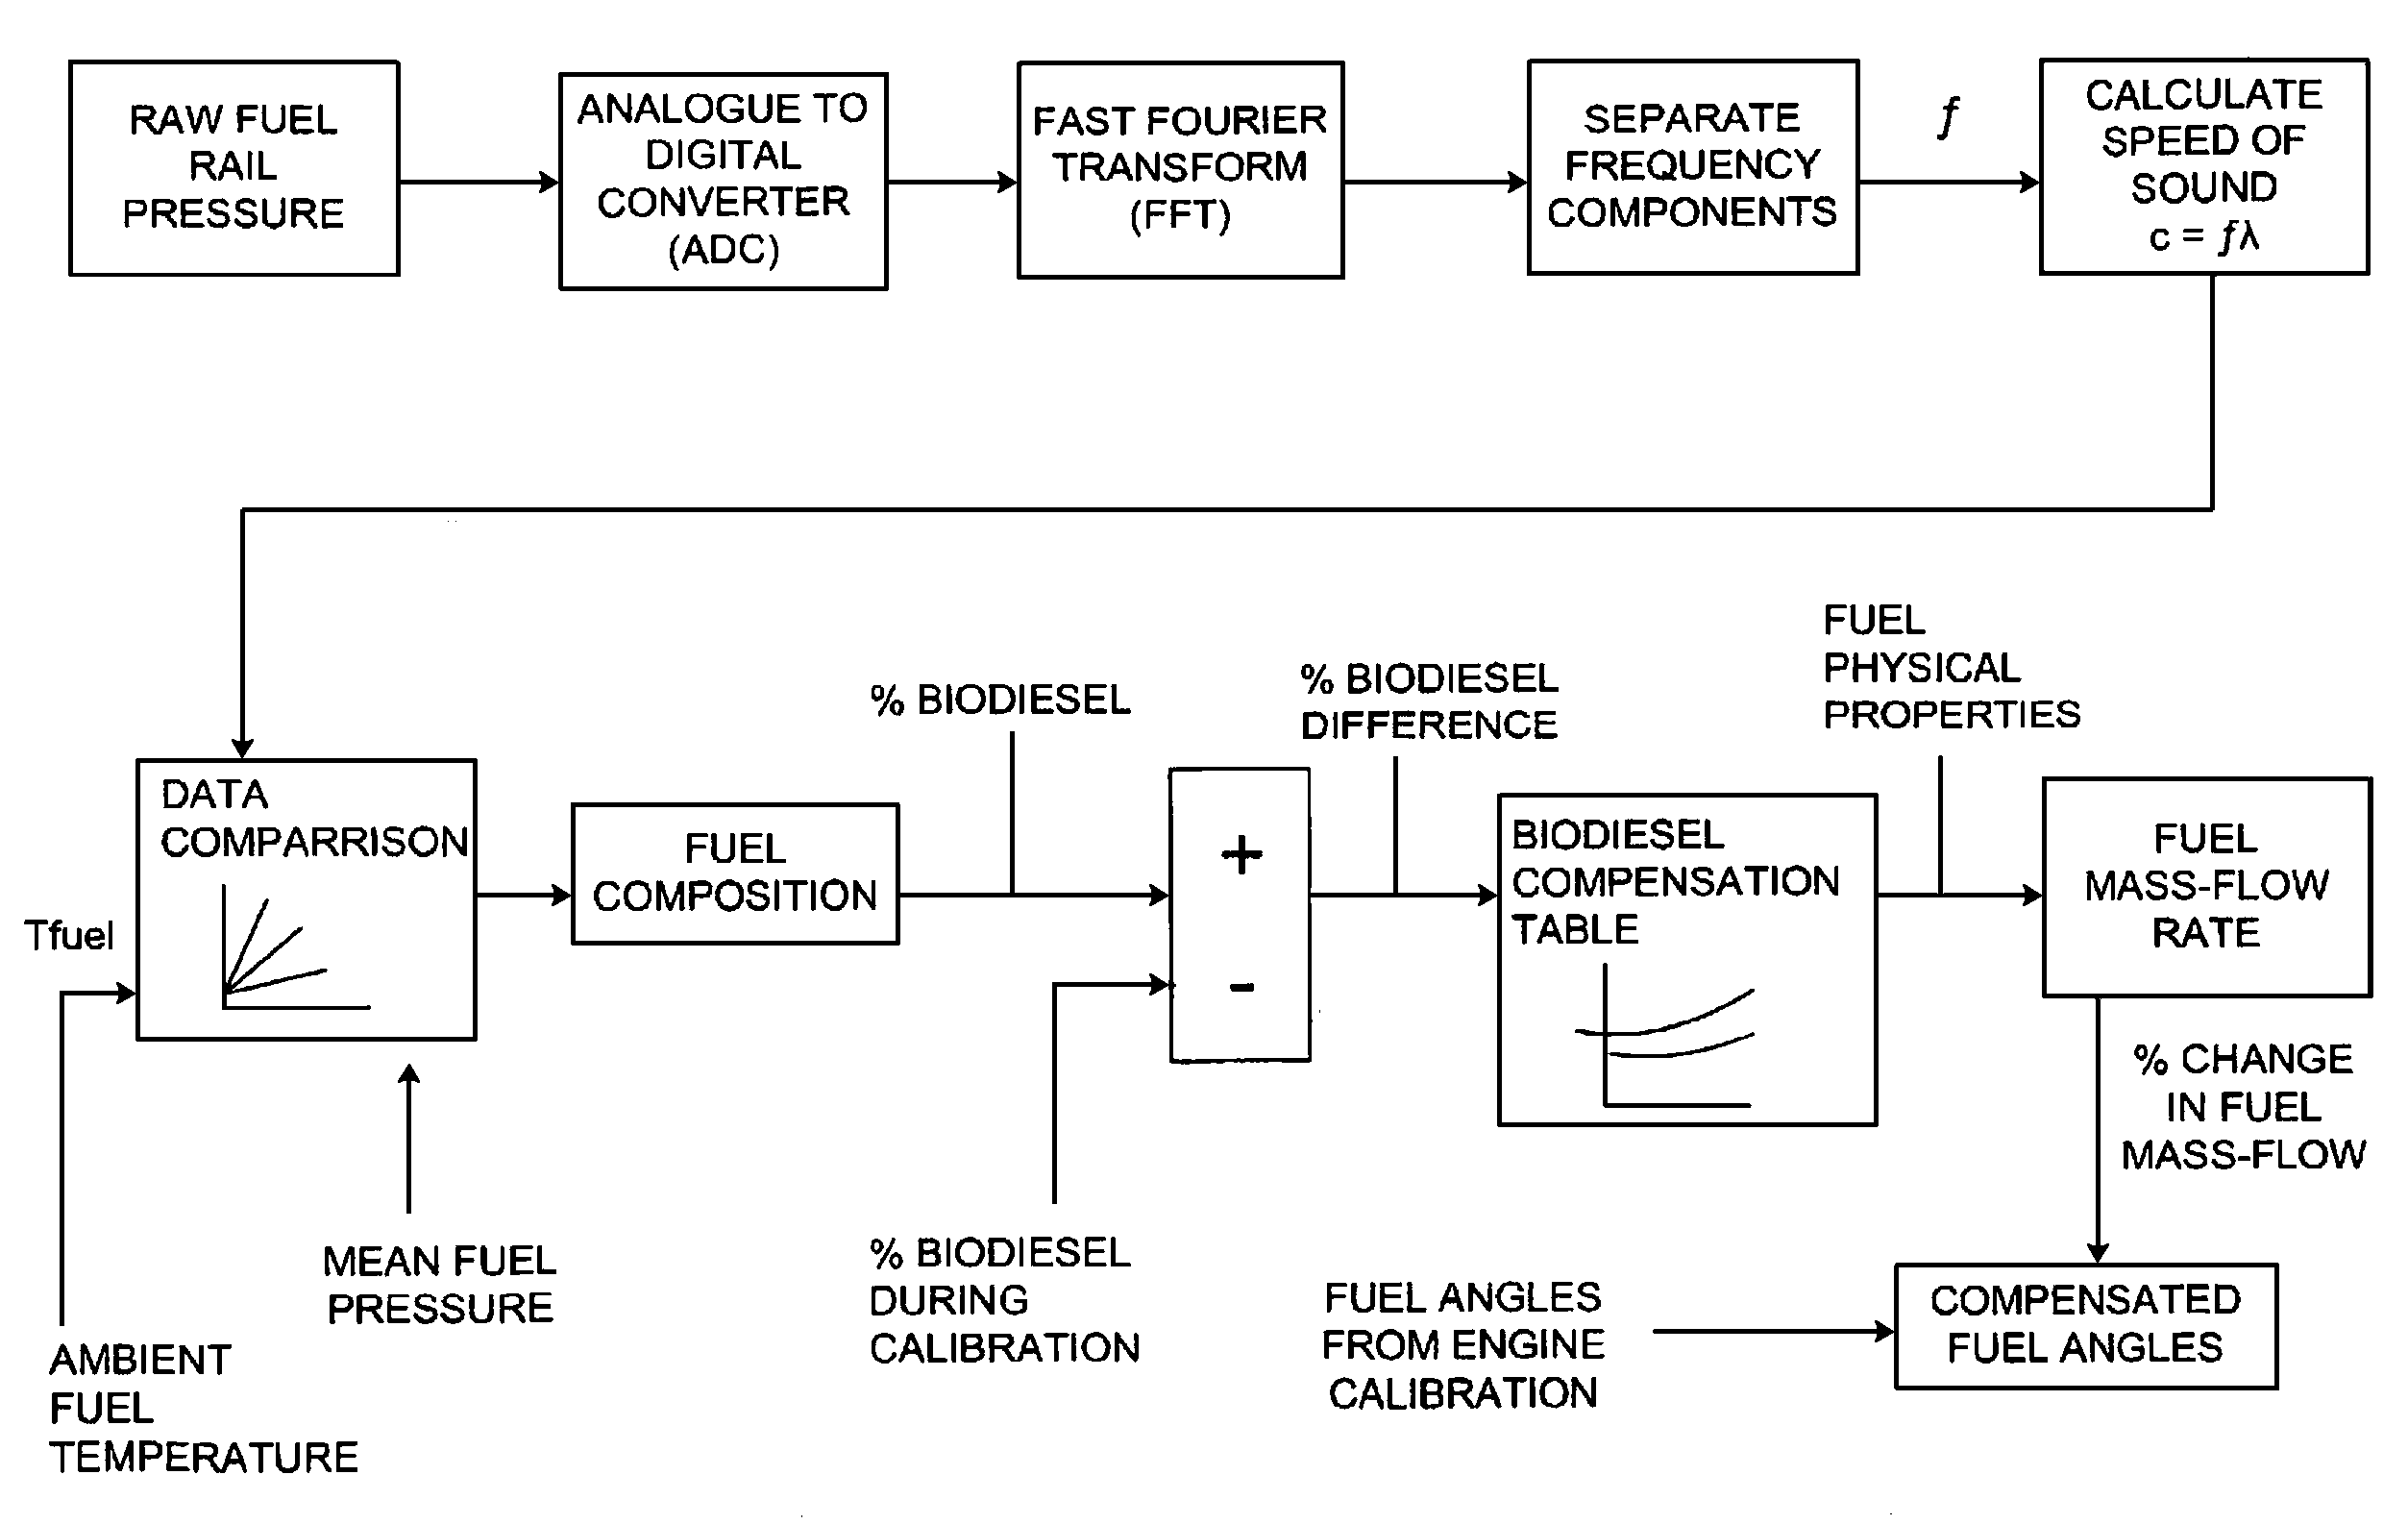 Fuel composition estimation and control of fuel injection